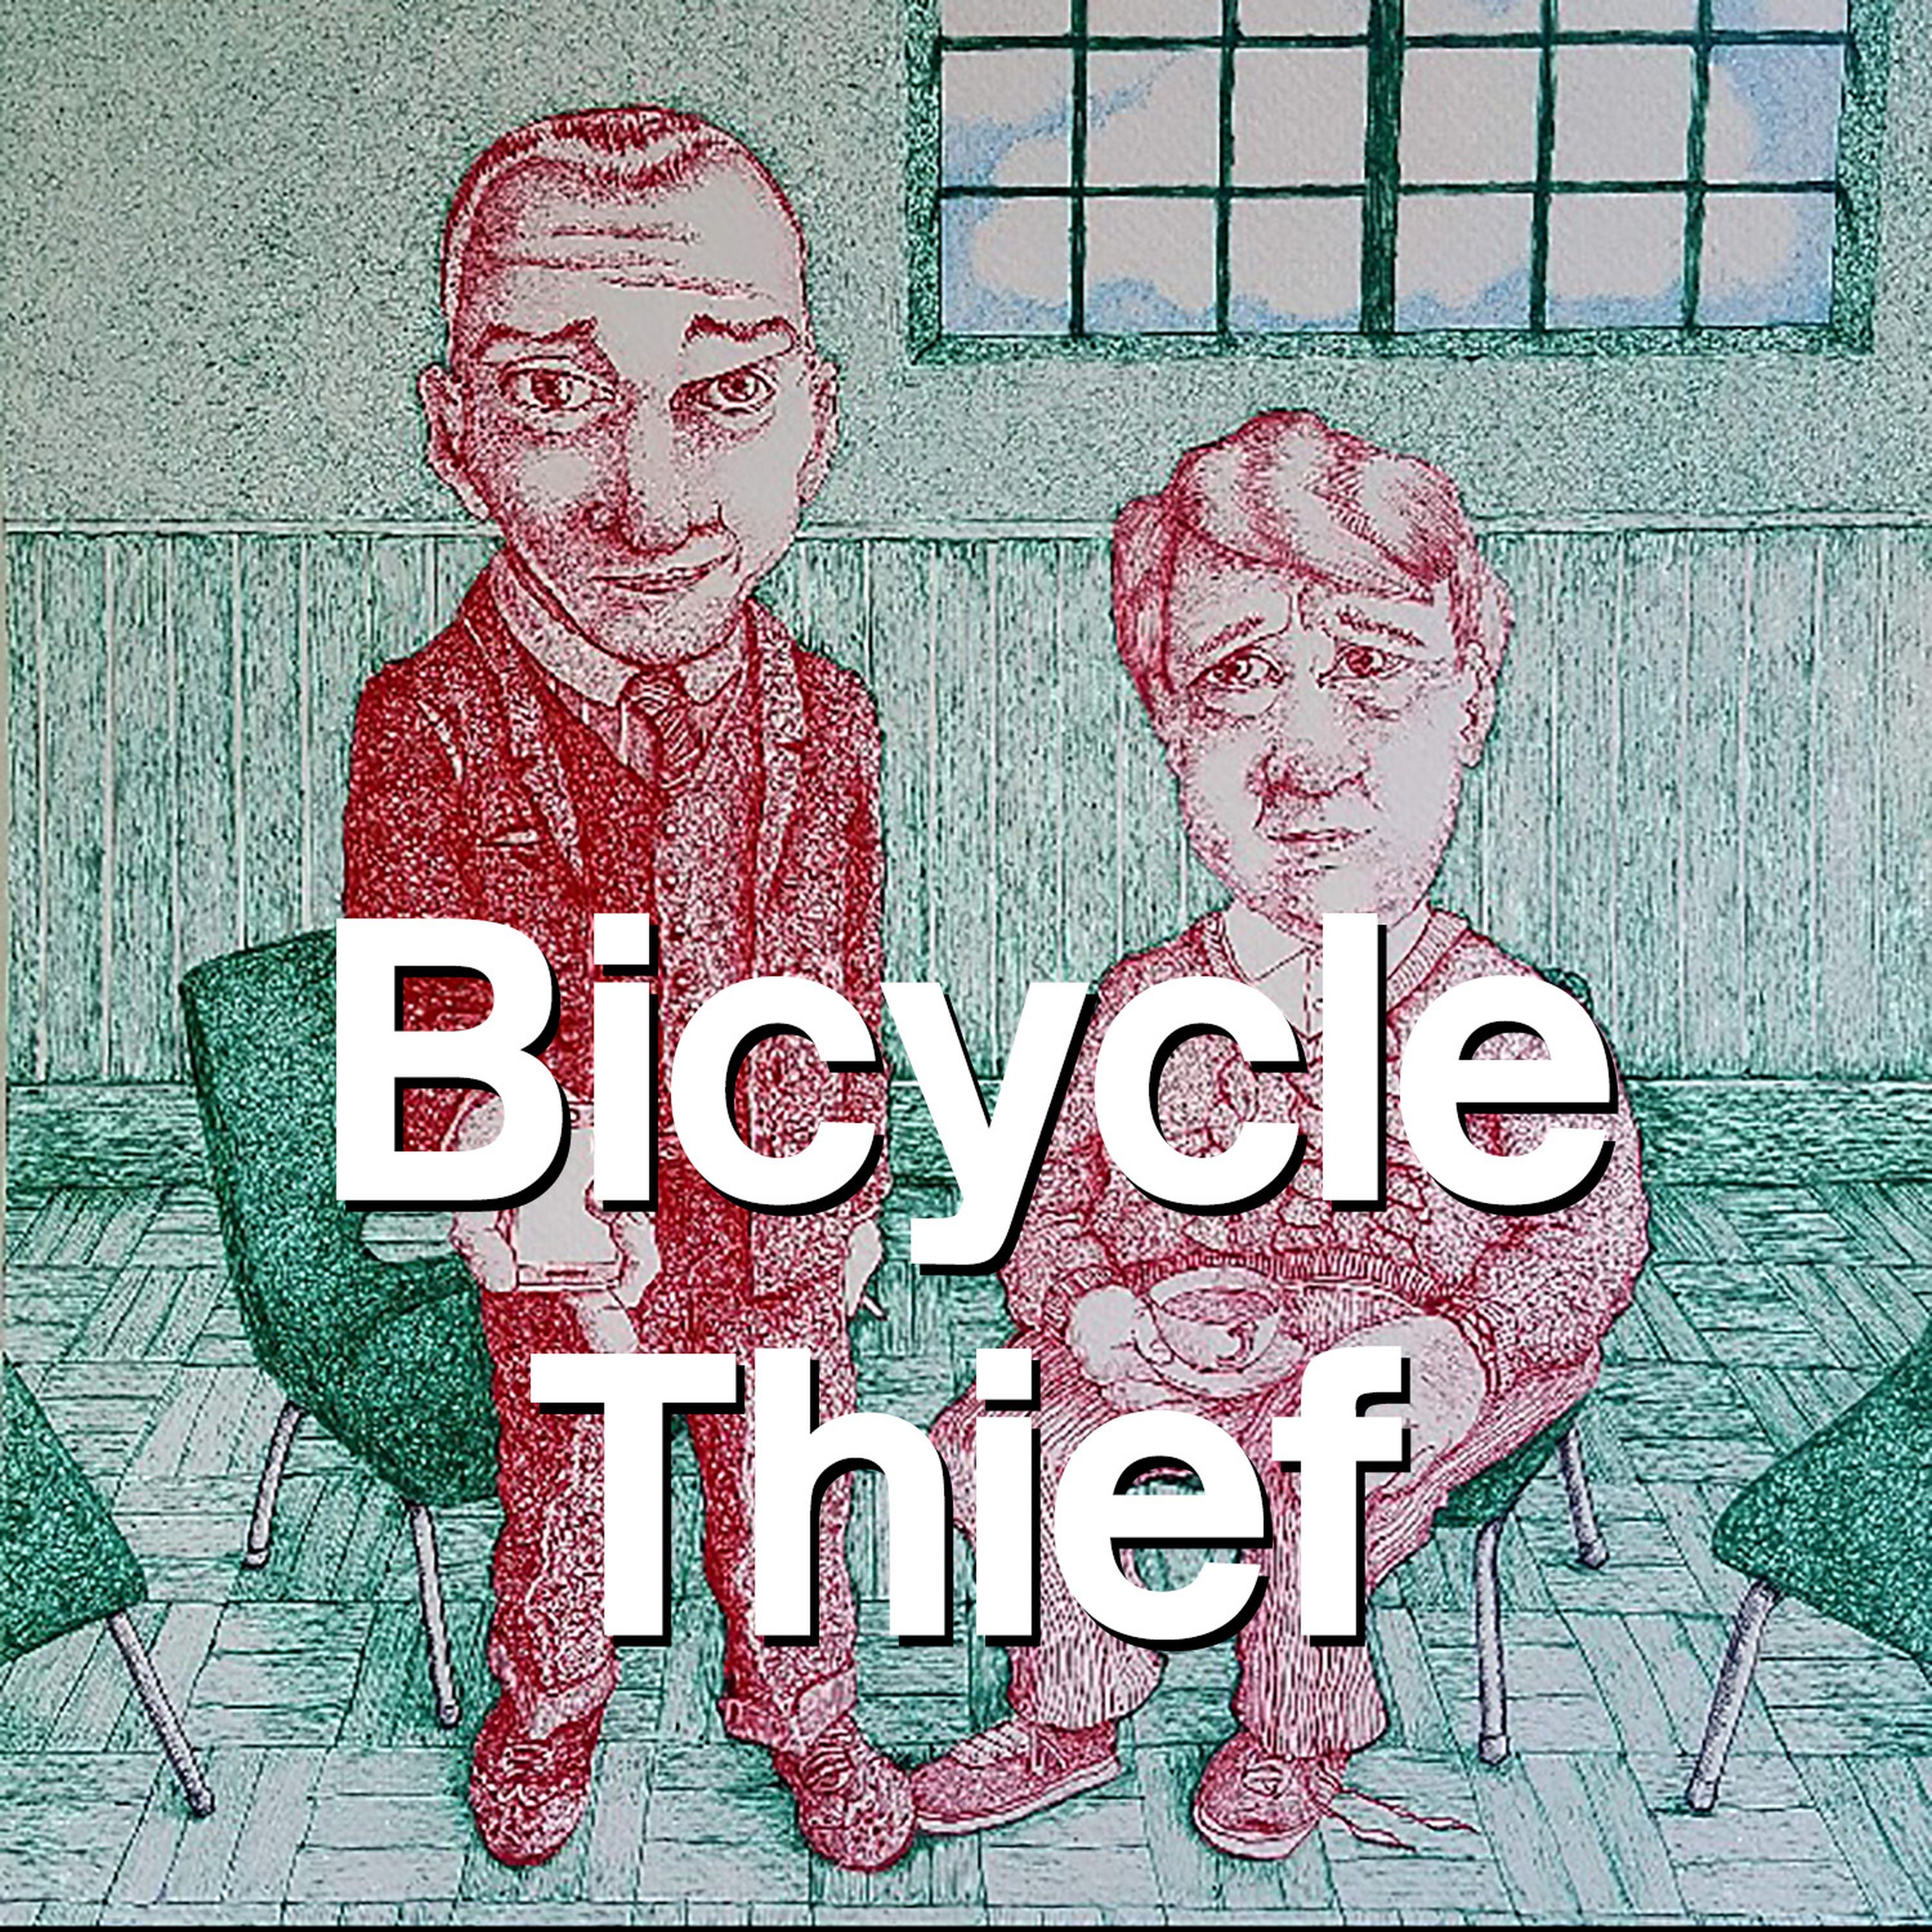 10: Bicycle Thief